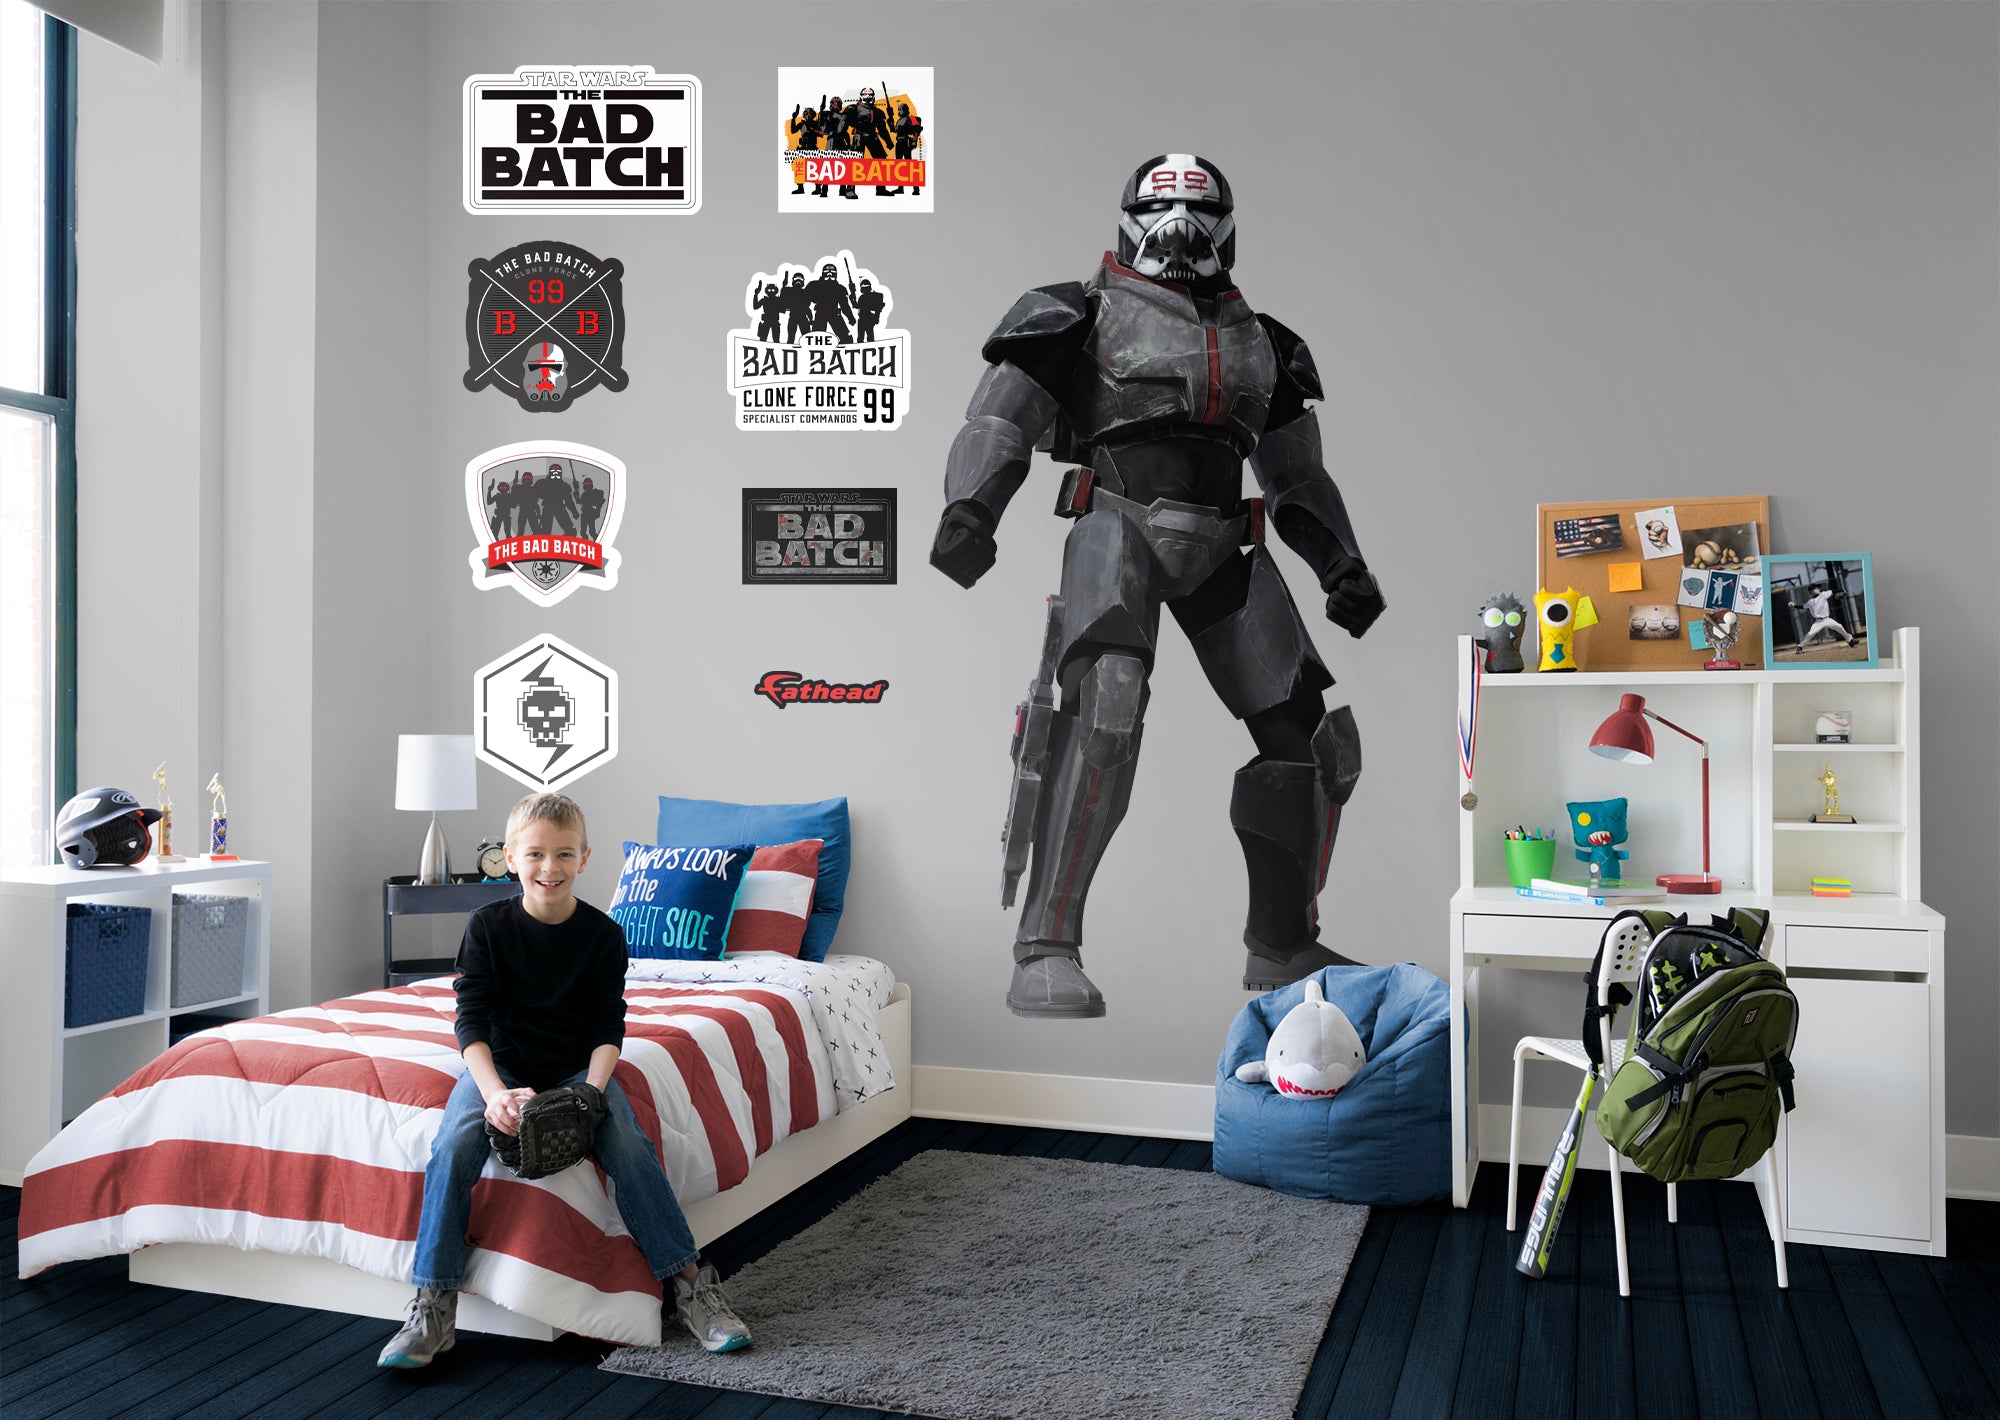 Bad Batch Wrecker - Officially Licensed Star Wars Removable Wall Decal Large by Fathead | Vinyl